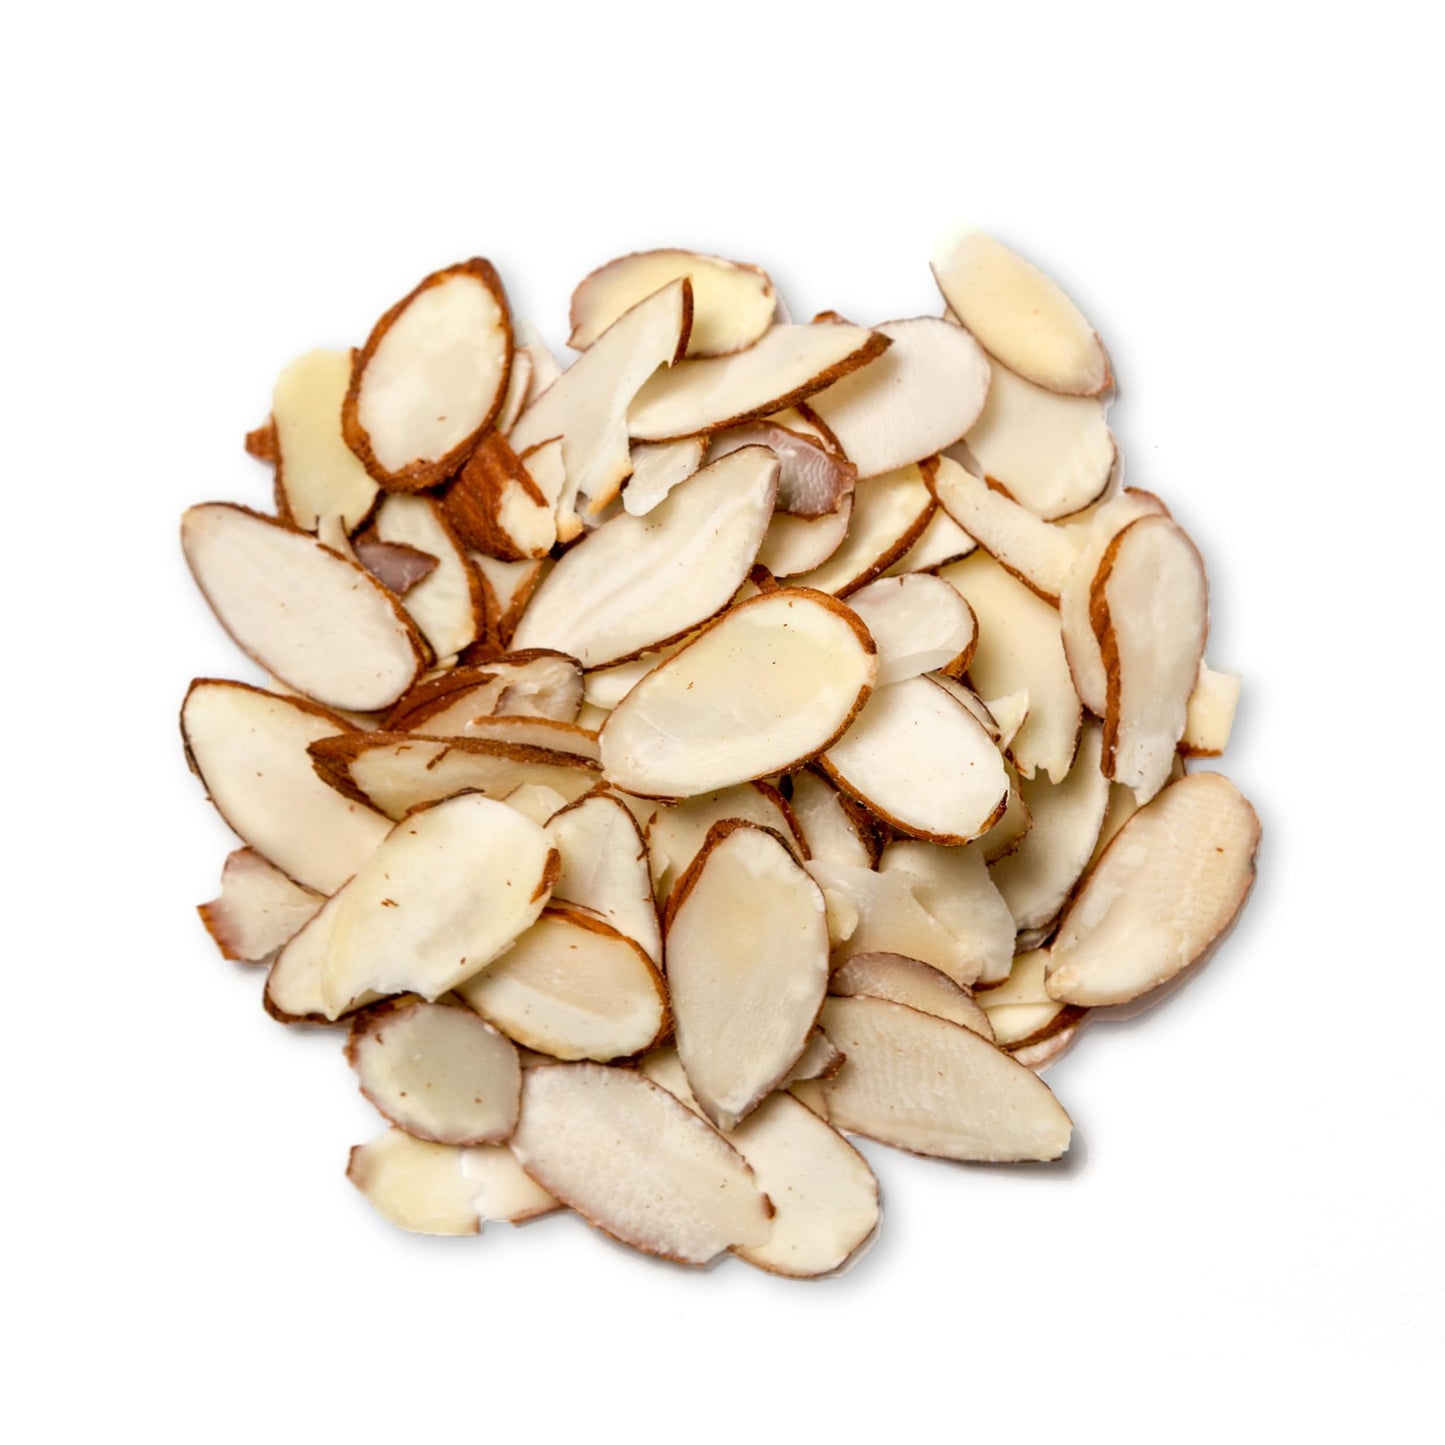 California Natural Sliced Almonds - Raw Unblanched Almond Nuts, Kosher, Vegan, Keto, Bulk. High in Protein, Dietary Fiber, Vitamin E. Great for Desserts, Salads, Granola, and Shakes